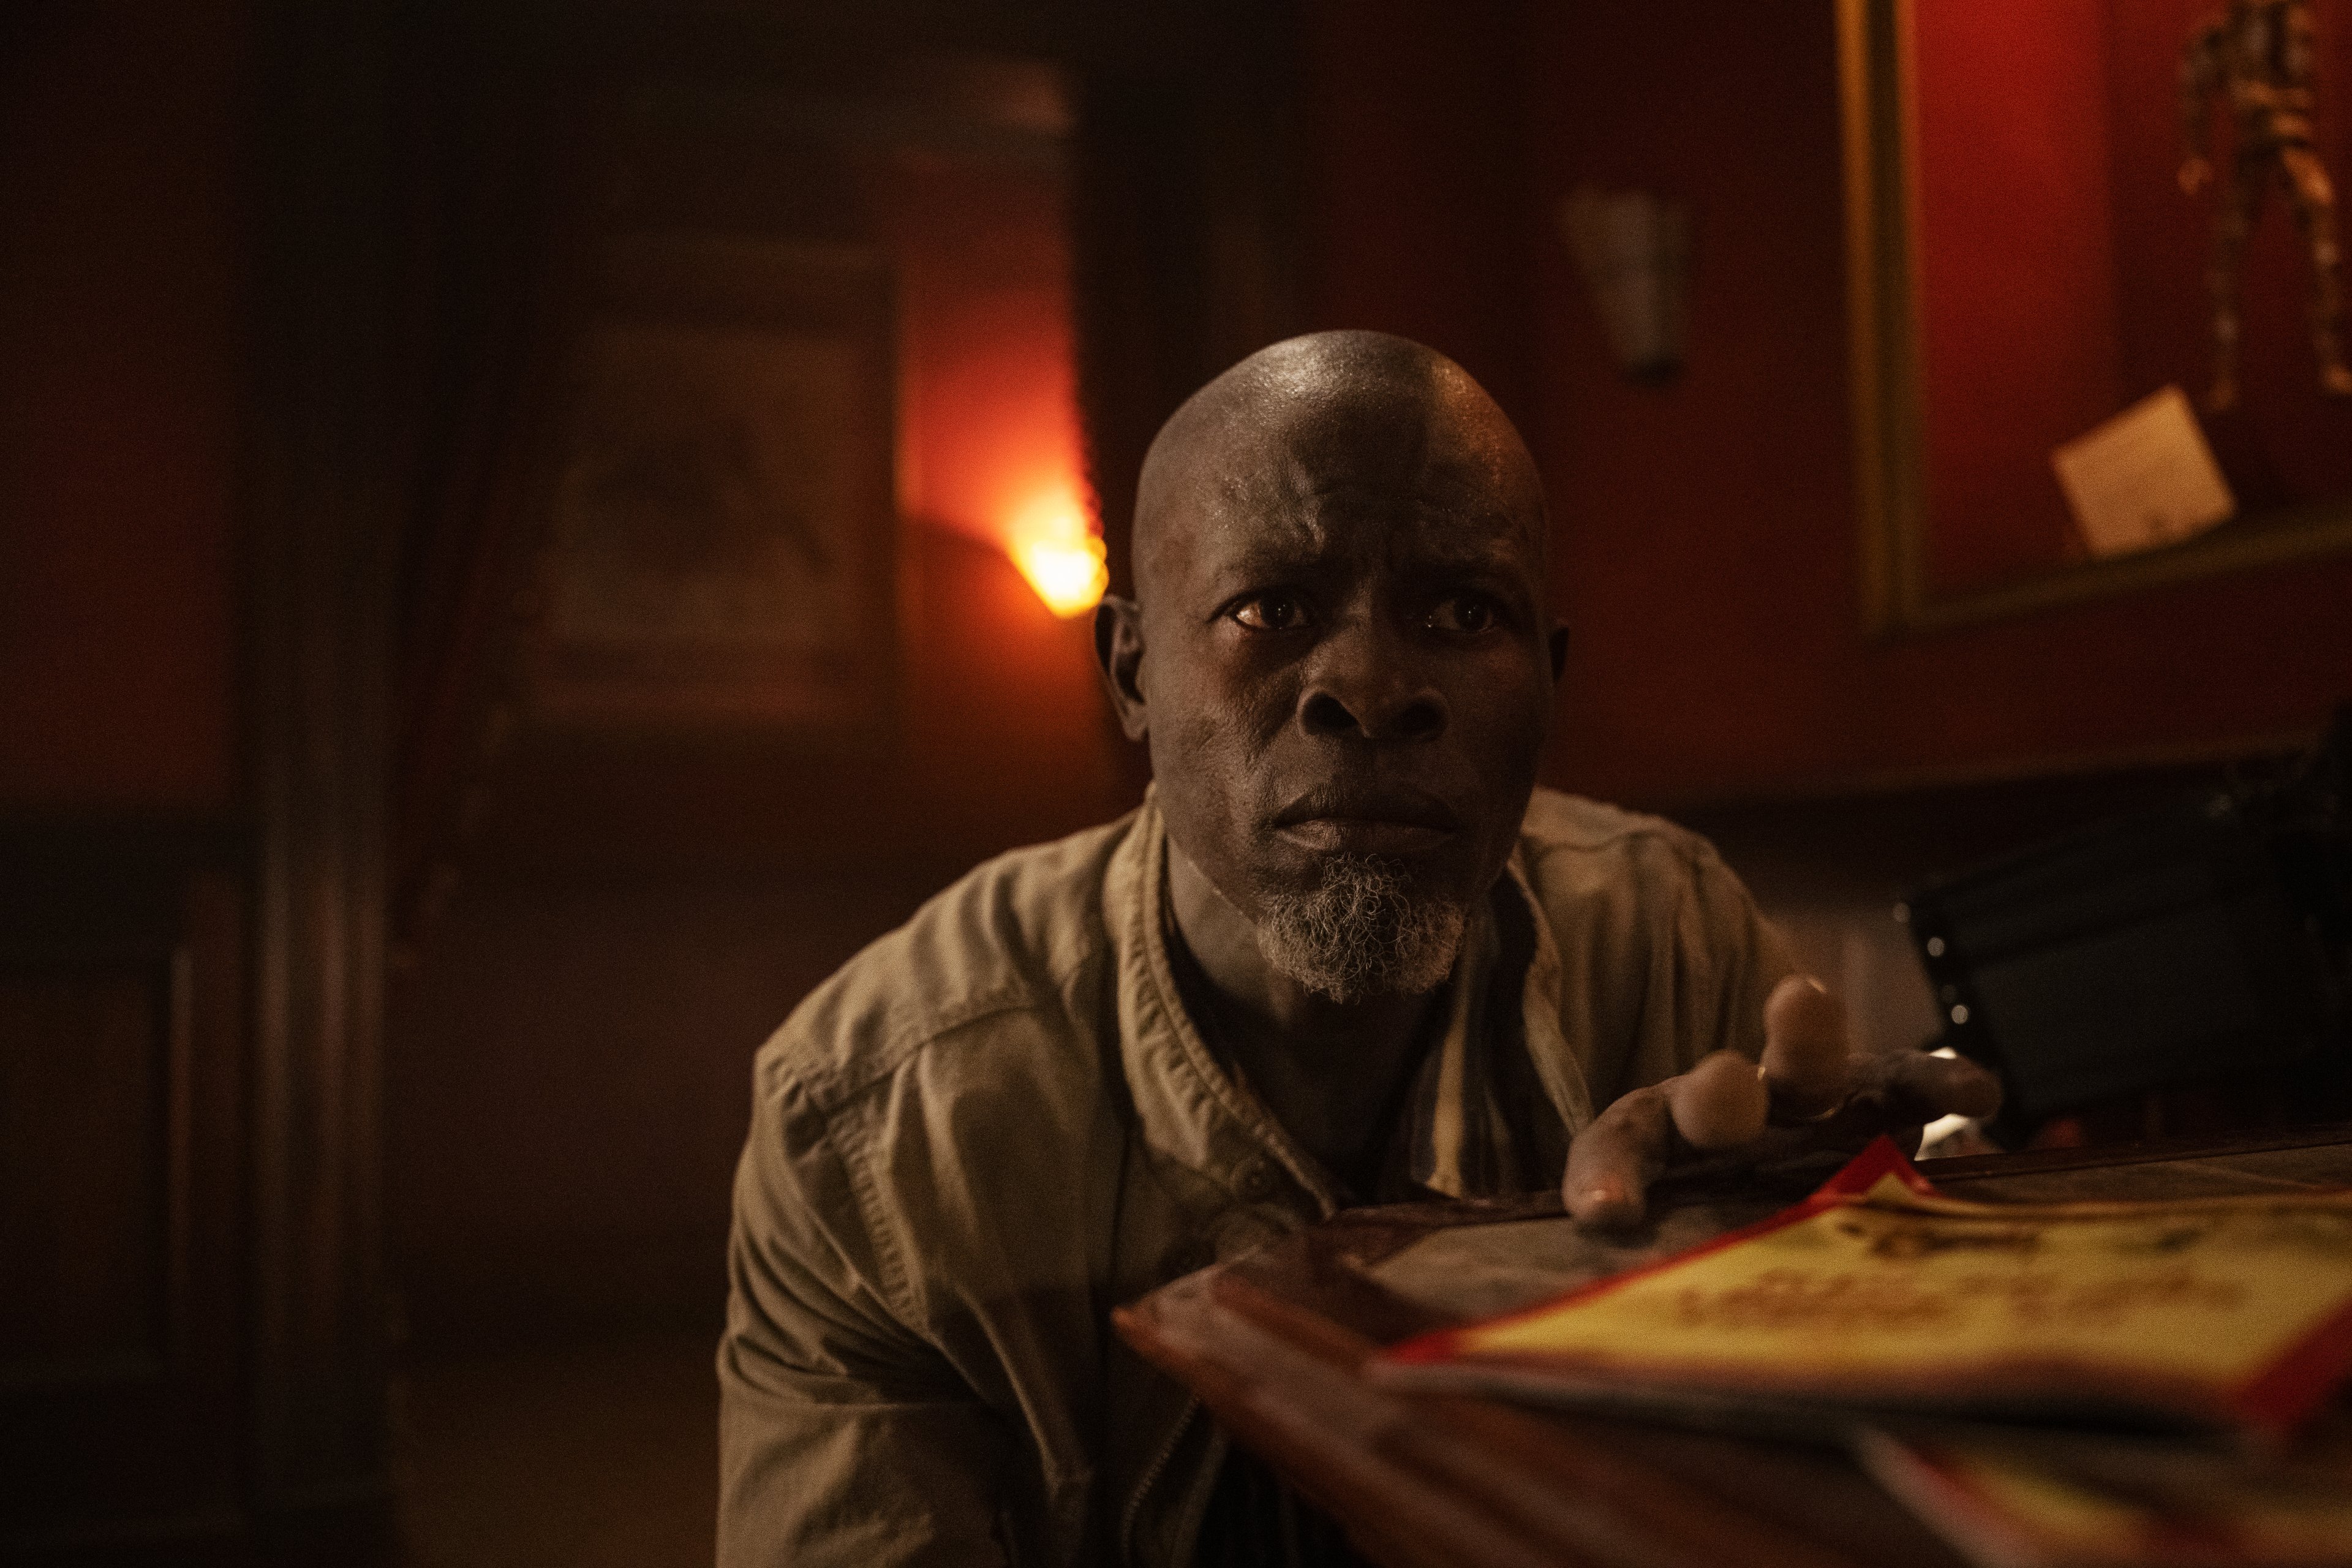 Djimon Hounsou as “Henri” in A Quiet Place: Day One from Paramount Pictures.